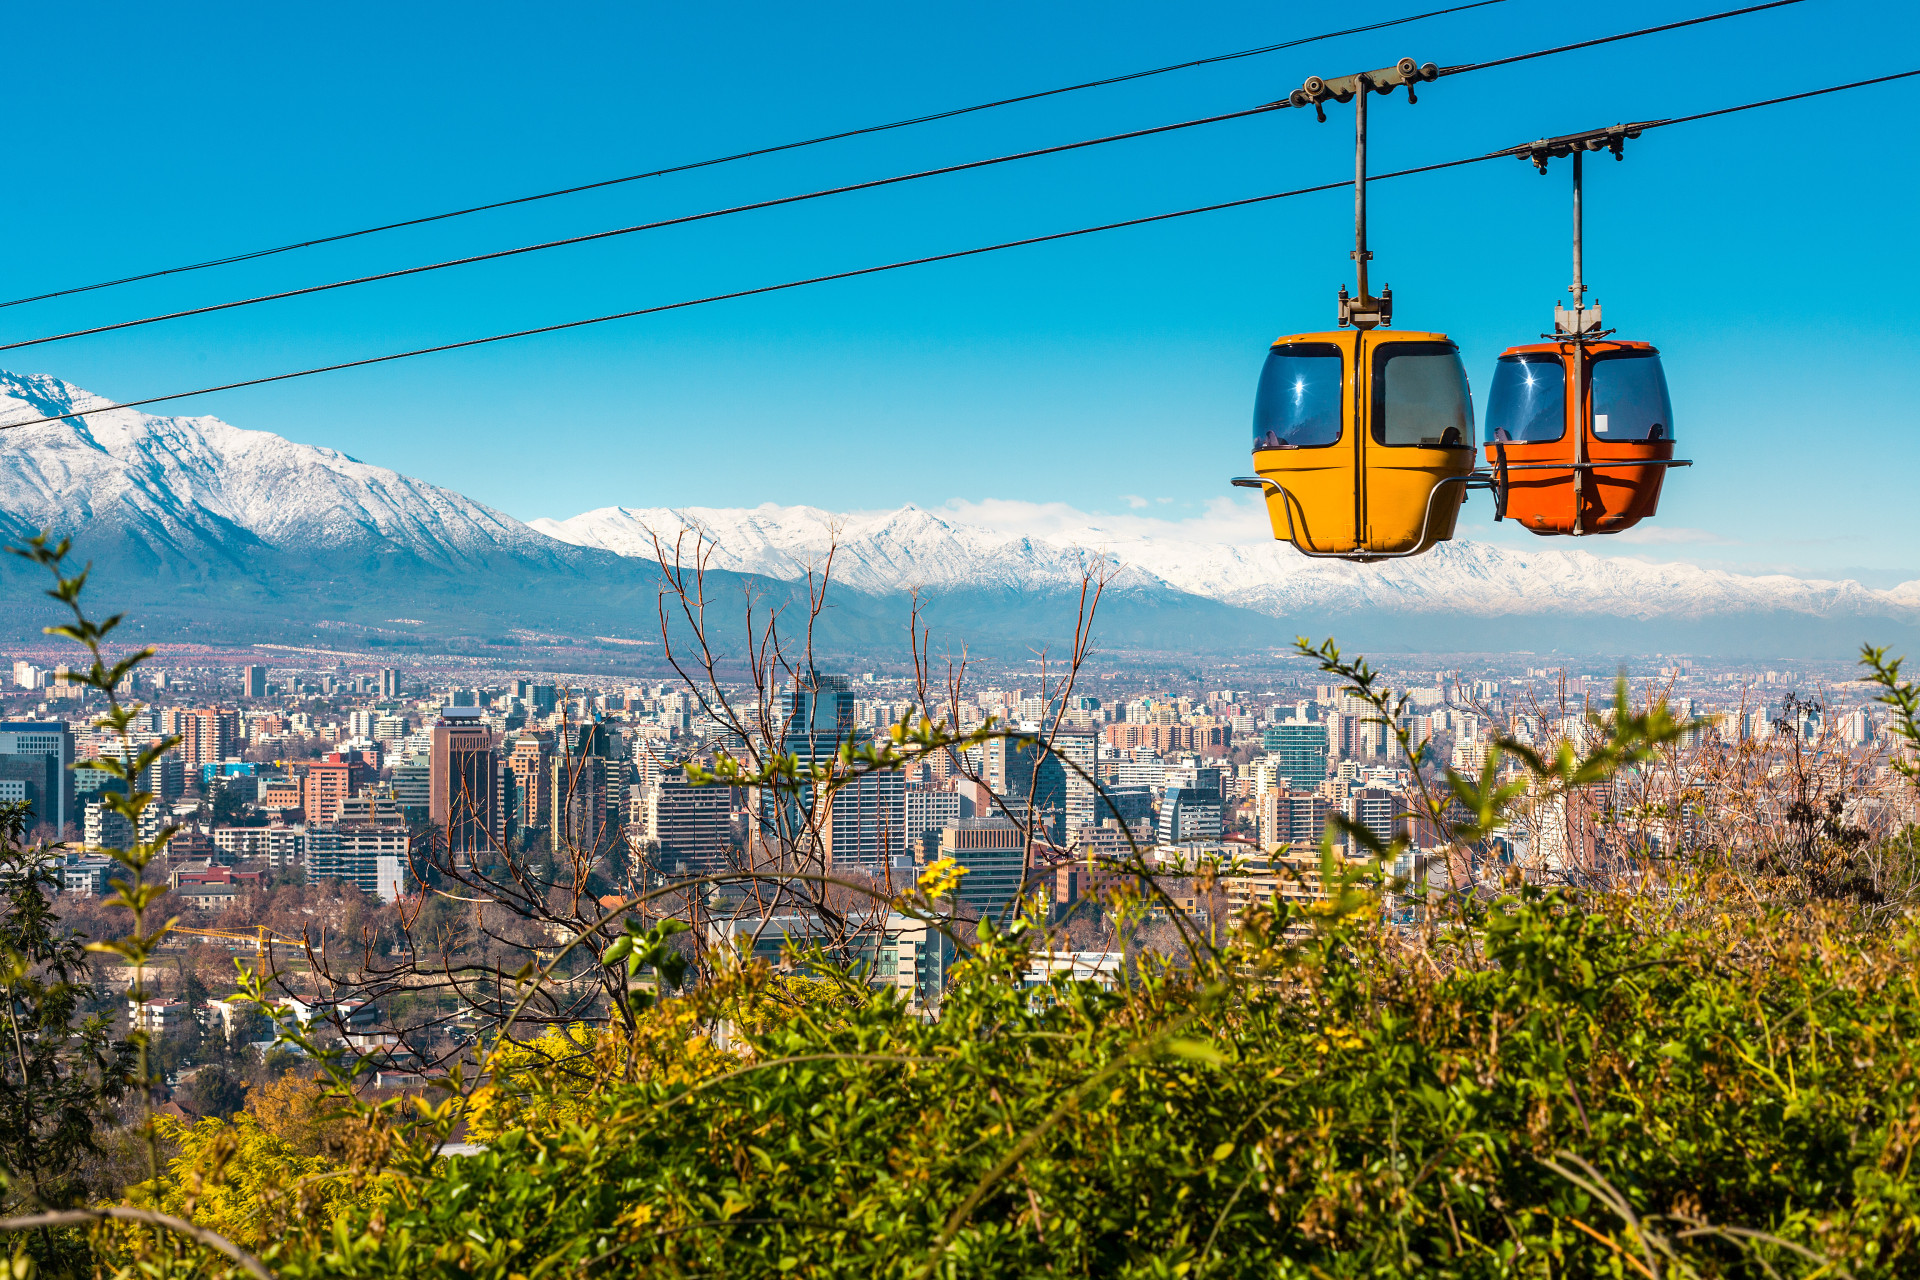 Chile's capital boasts a breathtaking scenery, with the beautiful Andes as the backdrop.